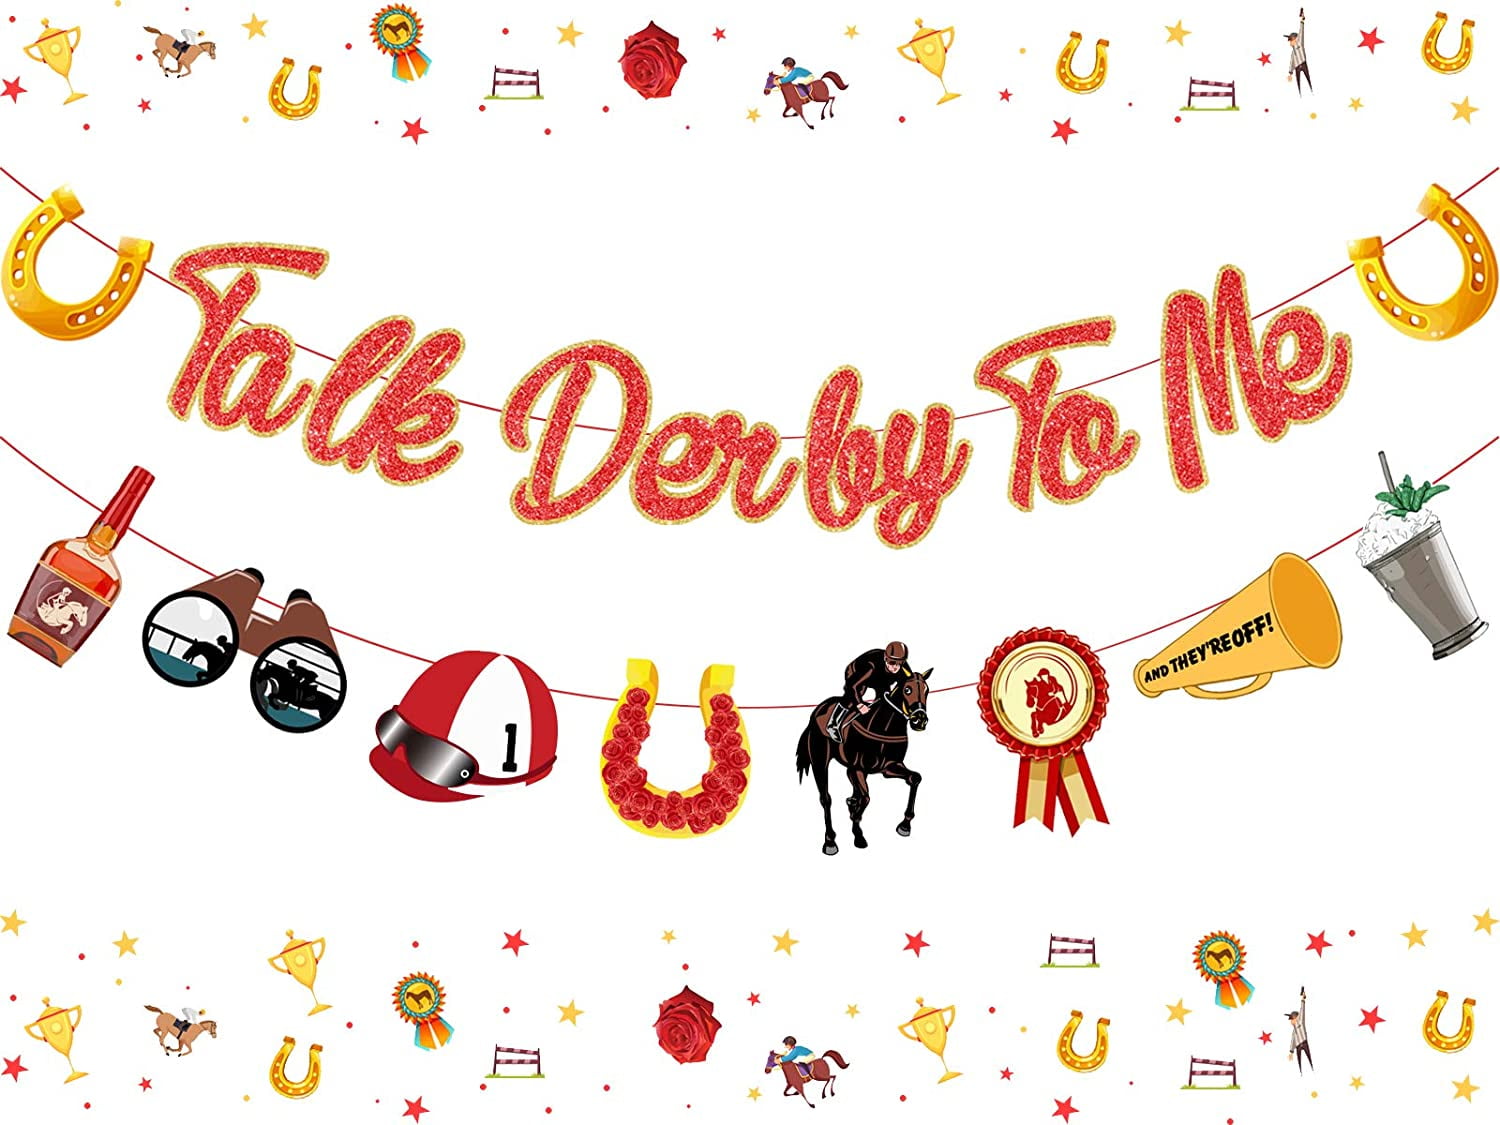 Kentucky Derby Banner Horse Race Party Decorations - Derby Race Run for the  Rose Derby Day Holiday Party Banner Decorations